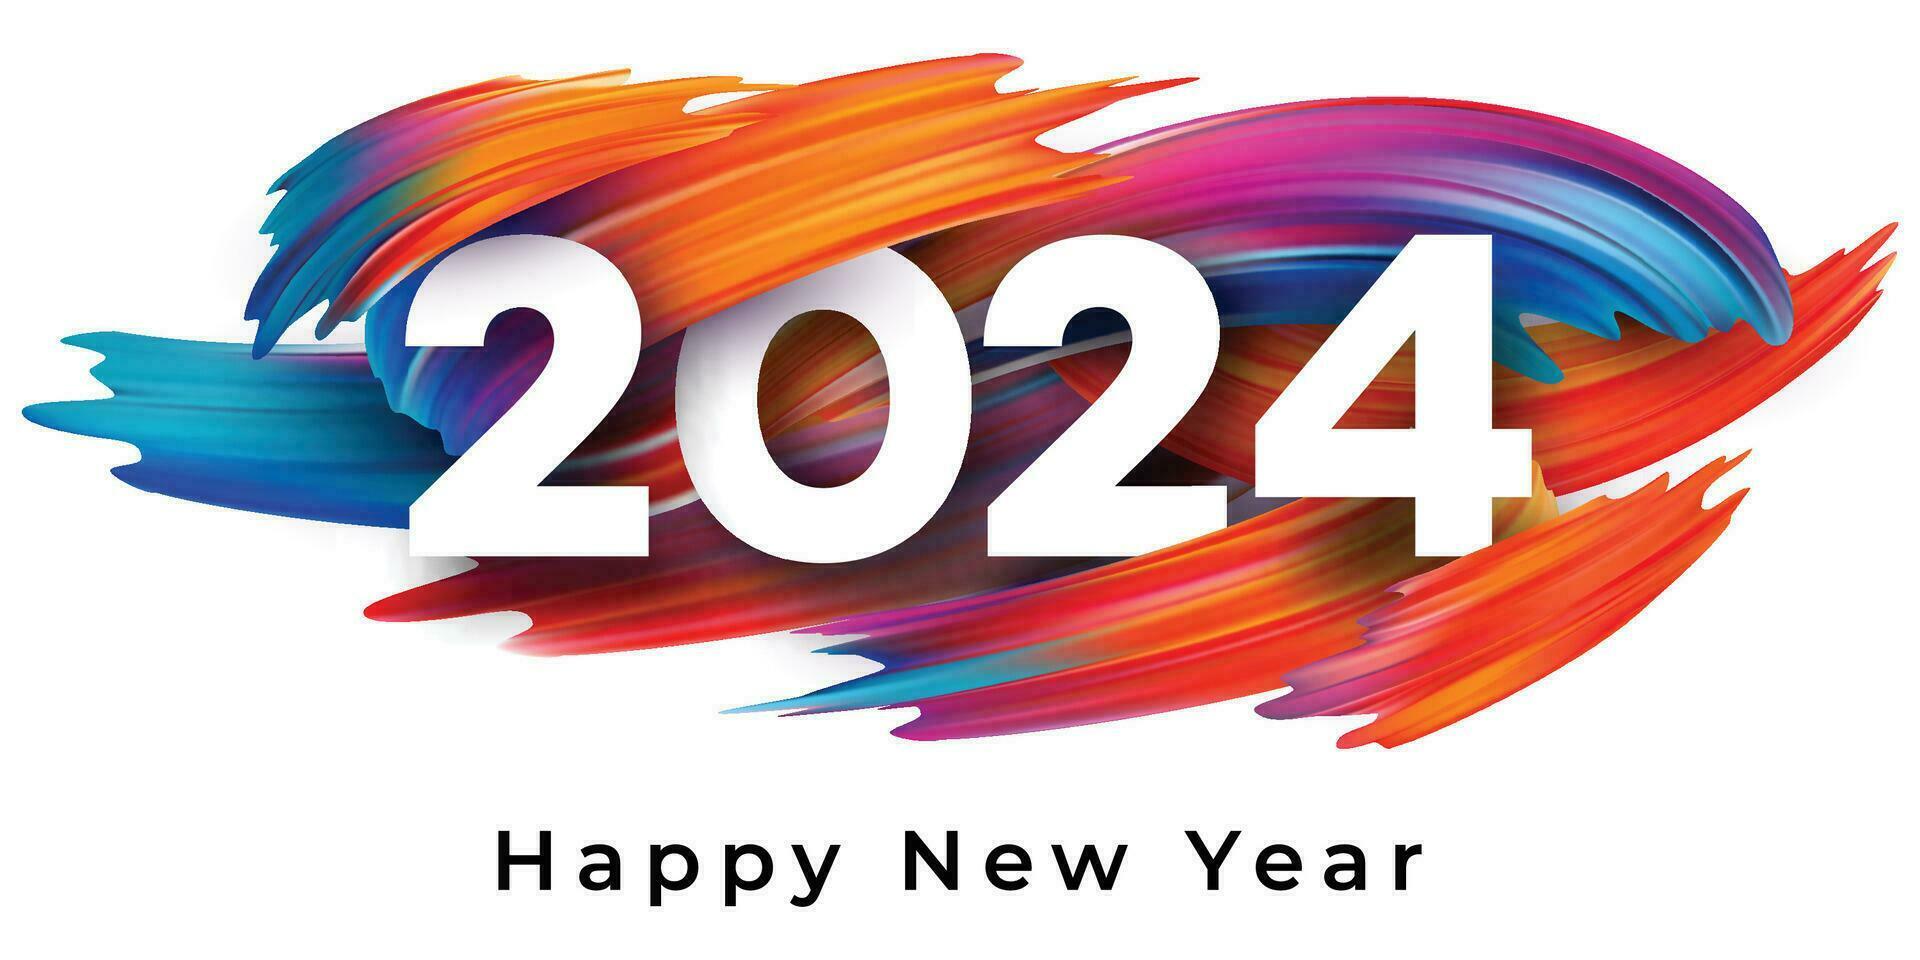 Happy new year 2024 design. With colorful truncated number illustrations. Premium vector design for poster, banner, greeting and new year 2024 celebration.